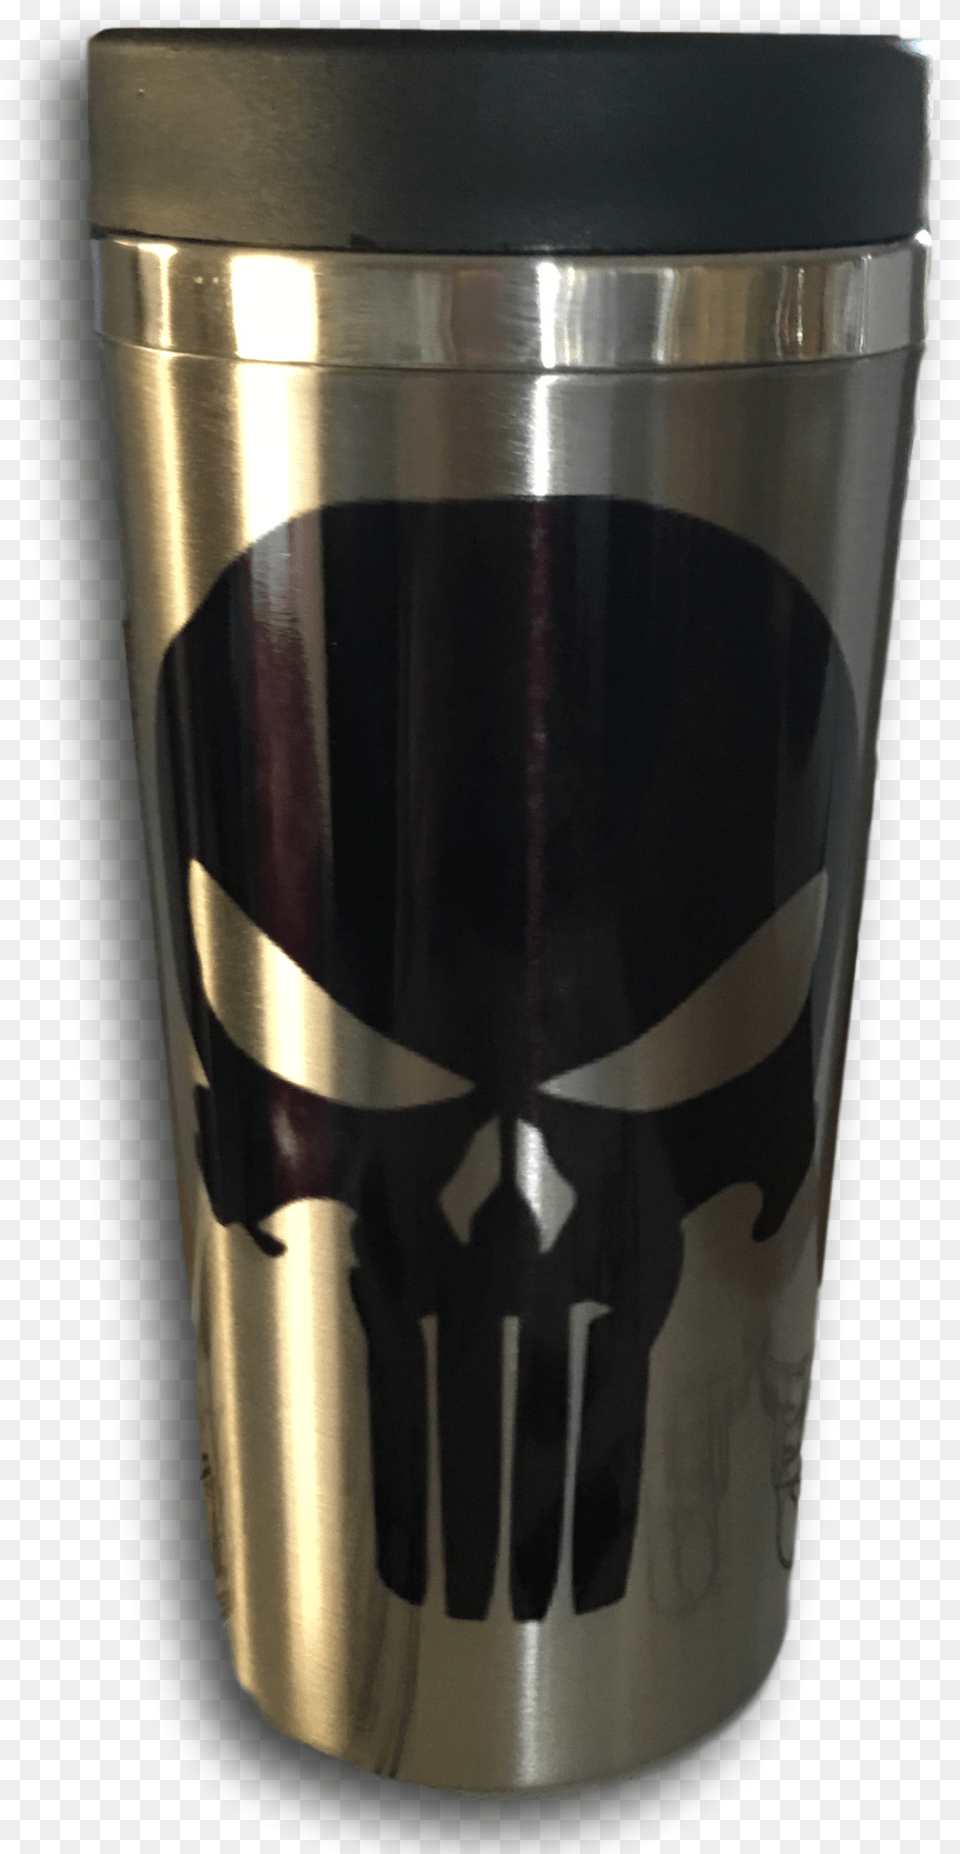 The Punisher Pint Glass, Bottle, Shaker Free Png